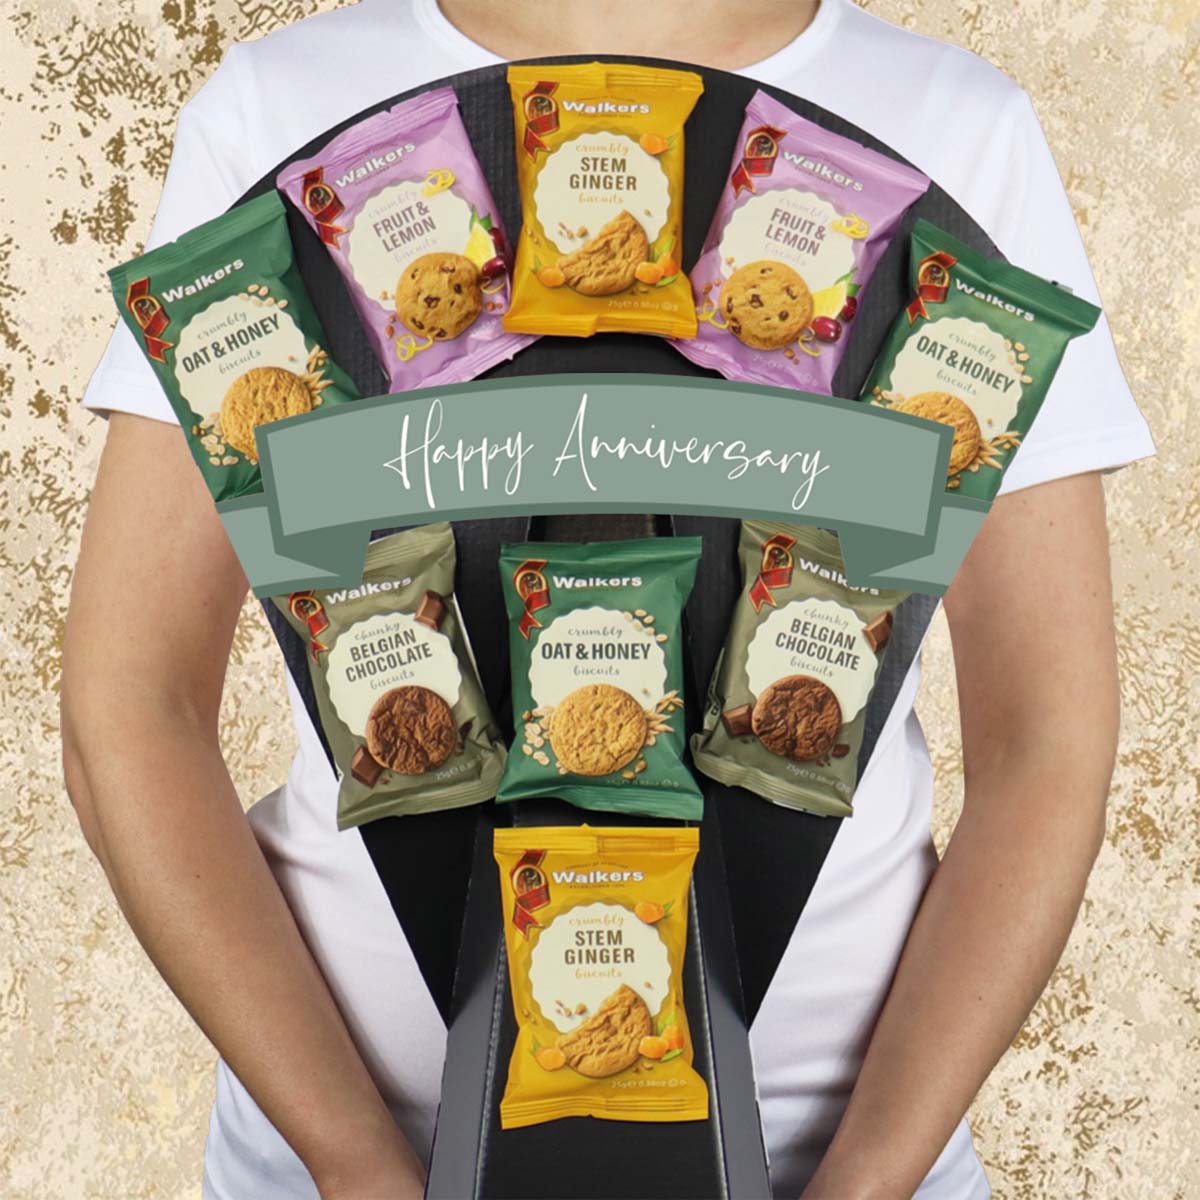 Large Border Biscuit Anniversary Bouquet with Butterscotch Crunch, Chocolate Cookies, Viennese Whirls and More - Gift Hamper Box by HamperWell